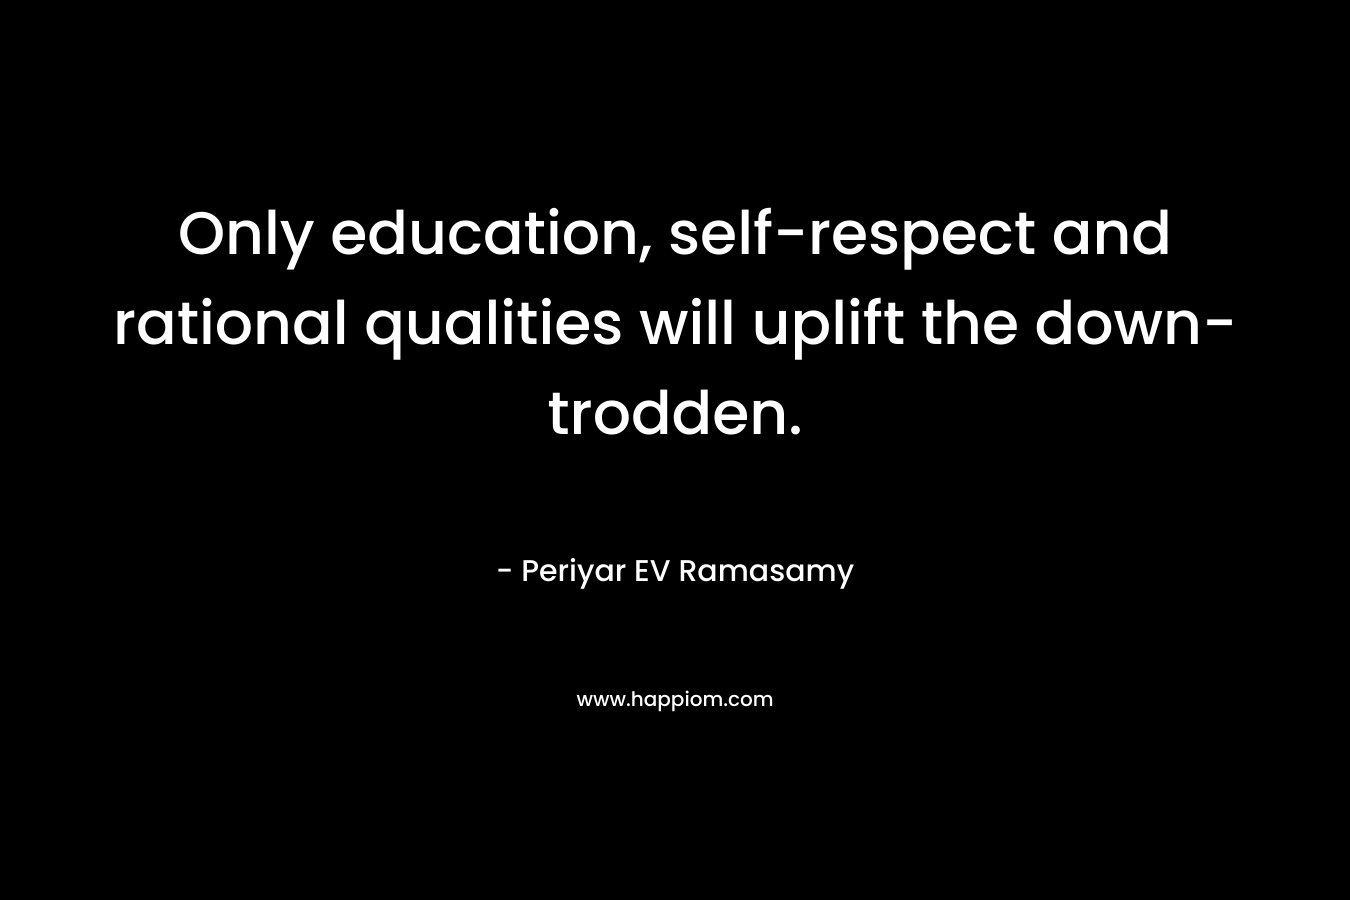 Only education, self-respect and rational qualities will uplift the down-trodden. – Periyar EV Ramasamy